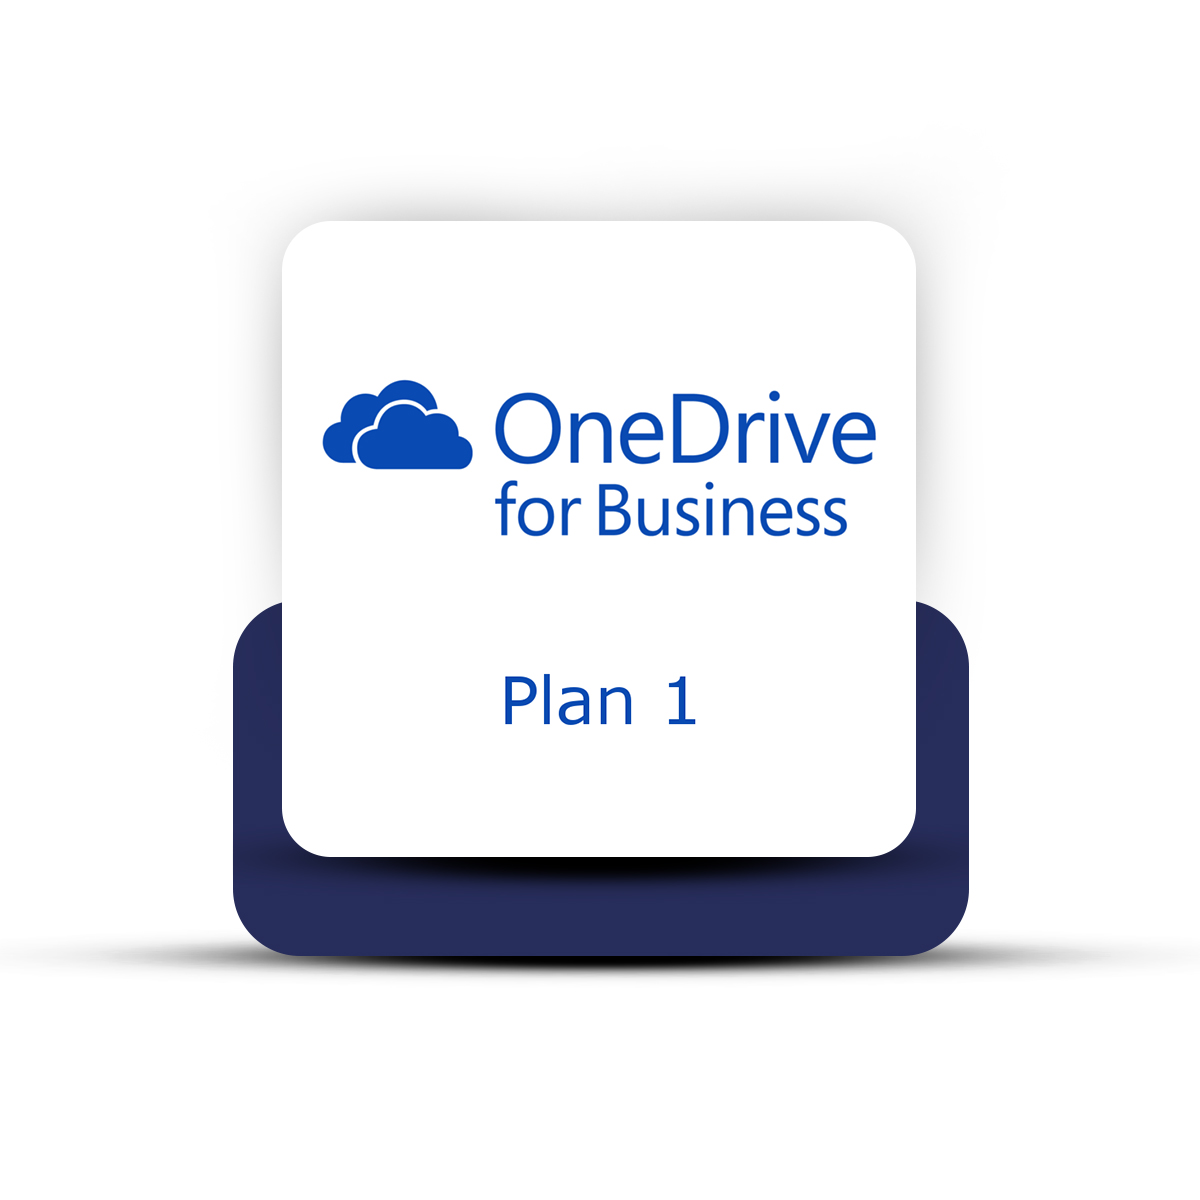 what is onedrive for business plan 1